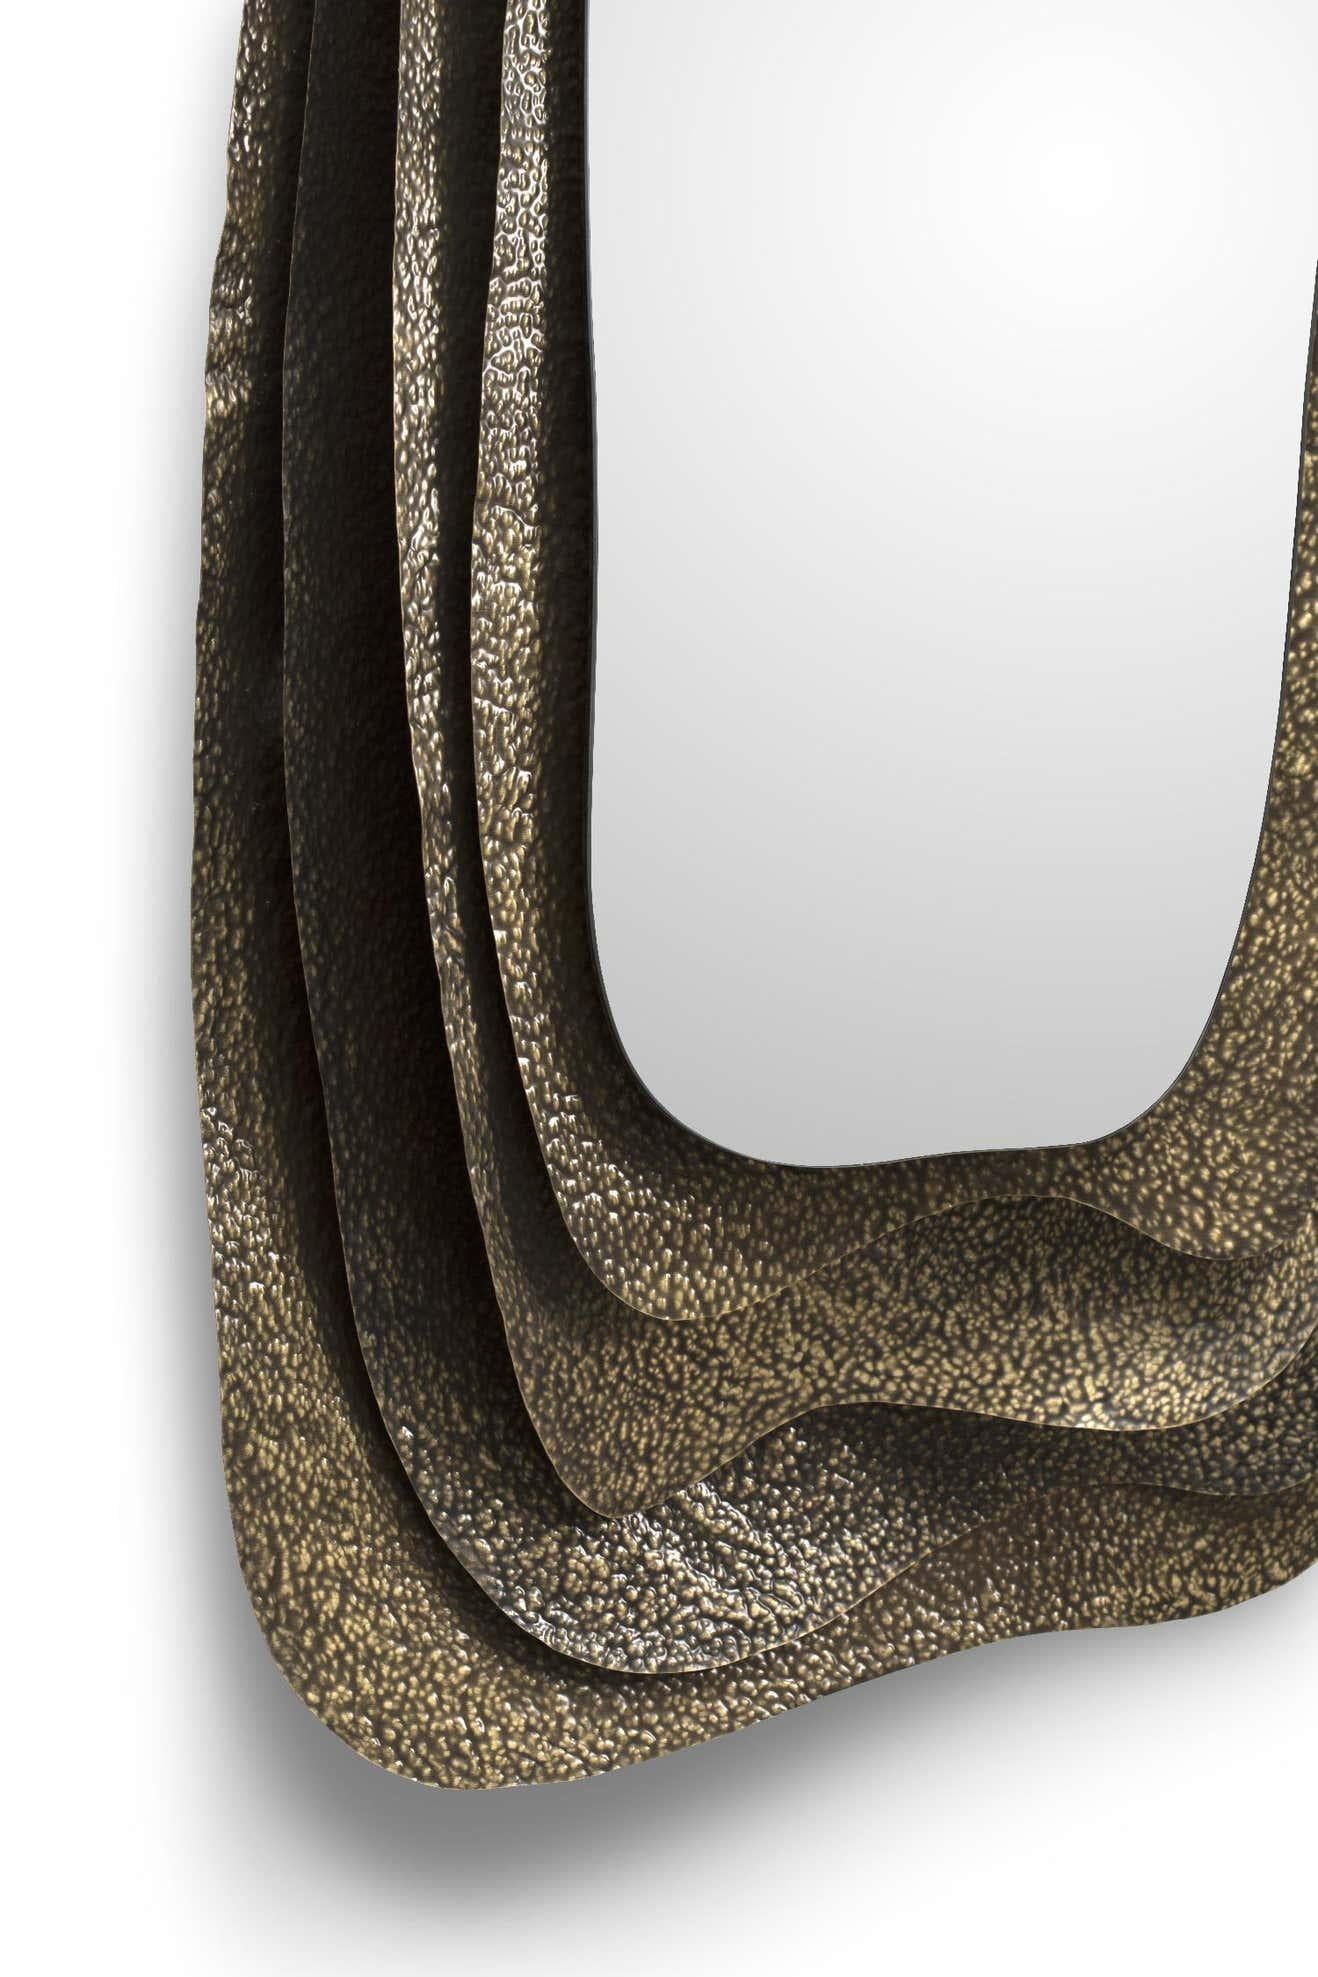 Mirror puddle
Glossy hammered aged brass. Smoked mirror.
Estimated production time: 8 - 9 weeks
Measures: Height: 180 cm
Width: 100 cm
Depth: 17 cm.